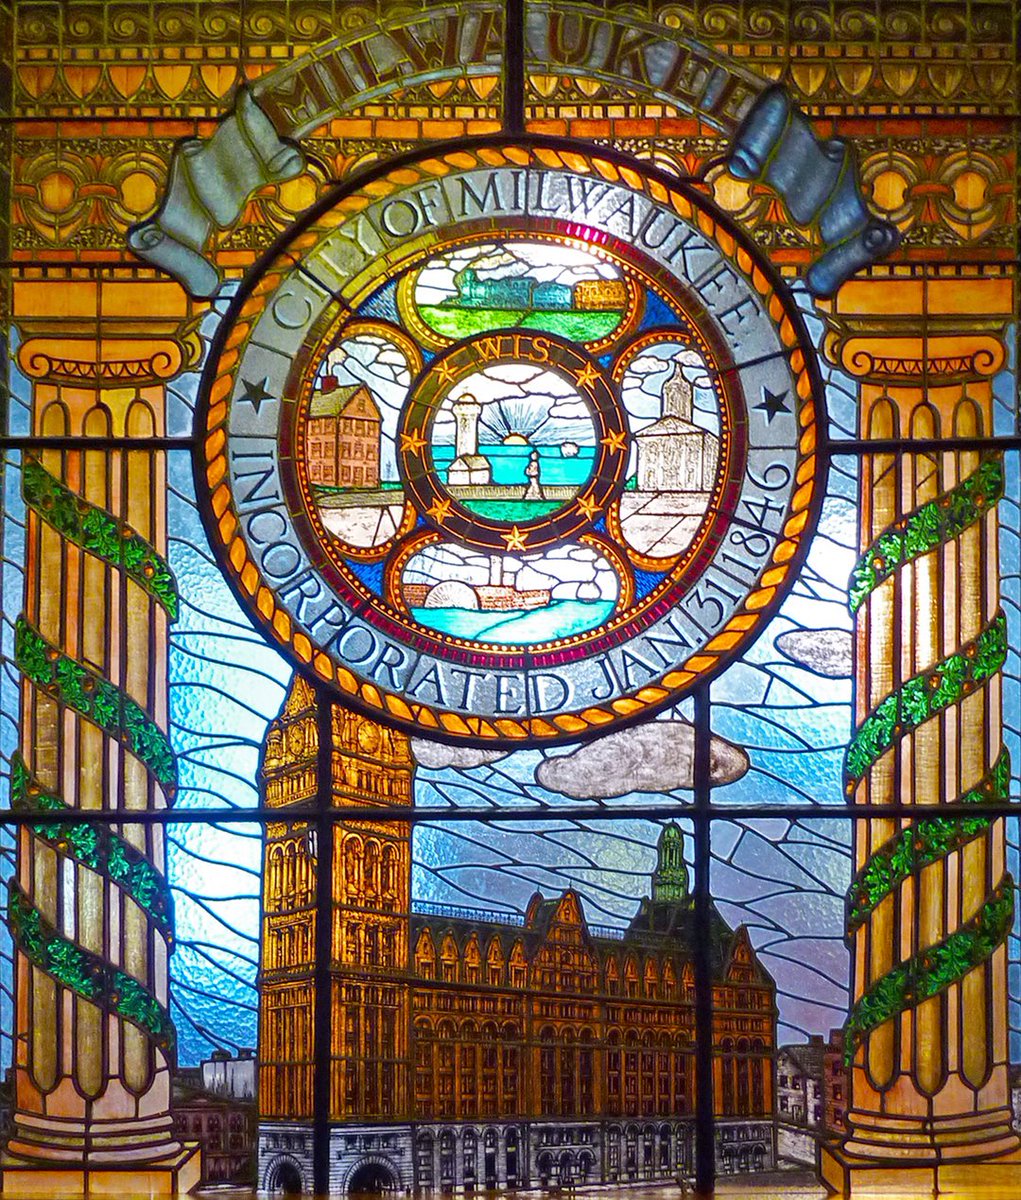 This beautiful stained glass window was created during the WPA Work Relief Programs in the 1930s, and completed under the supervision of WPA artist Adolf Karl. The window was restored and hung in the 3rd floor Common Council Chamber in 1978.

#MilwaukeeDay 
@cityofmilwaukee